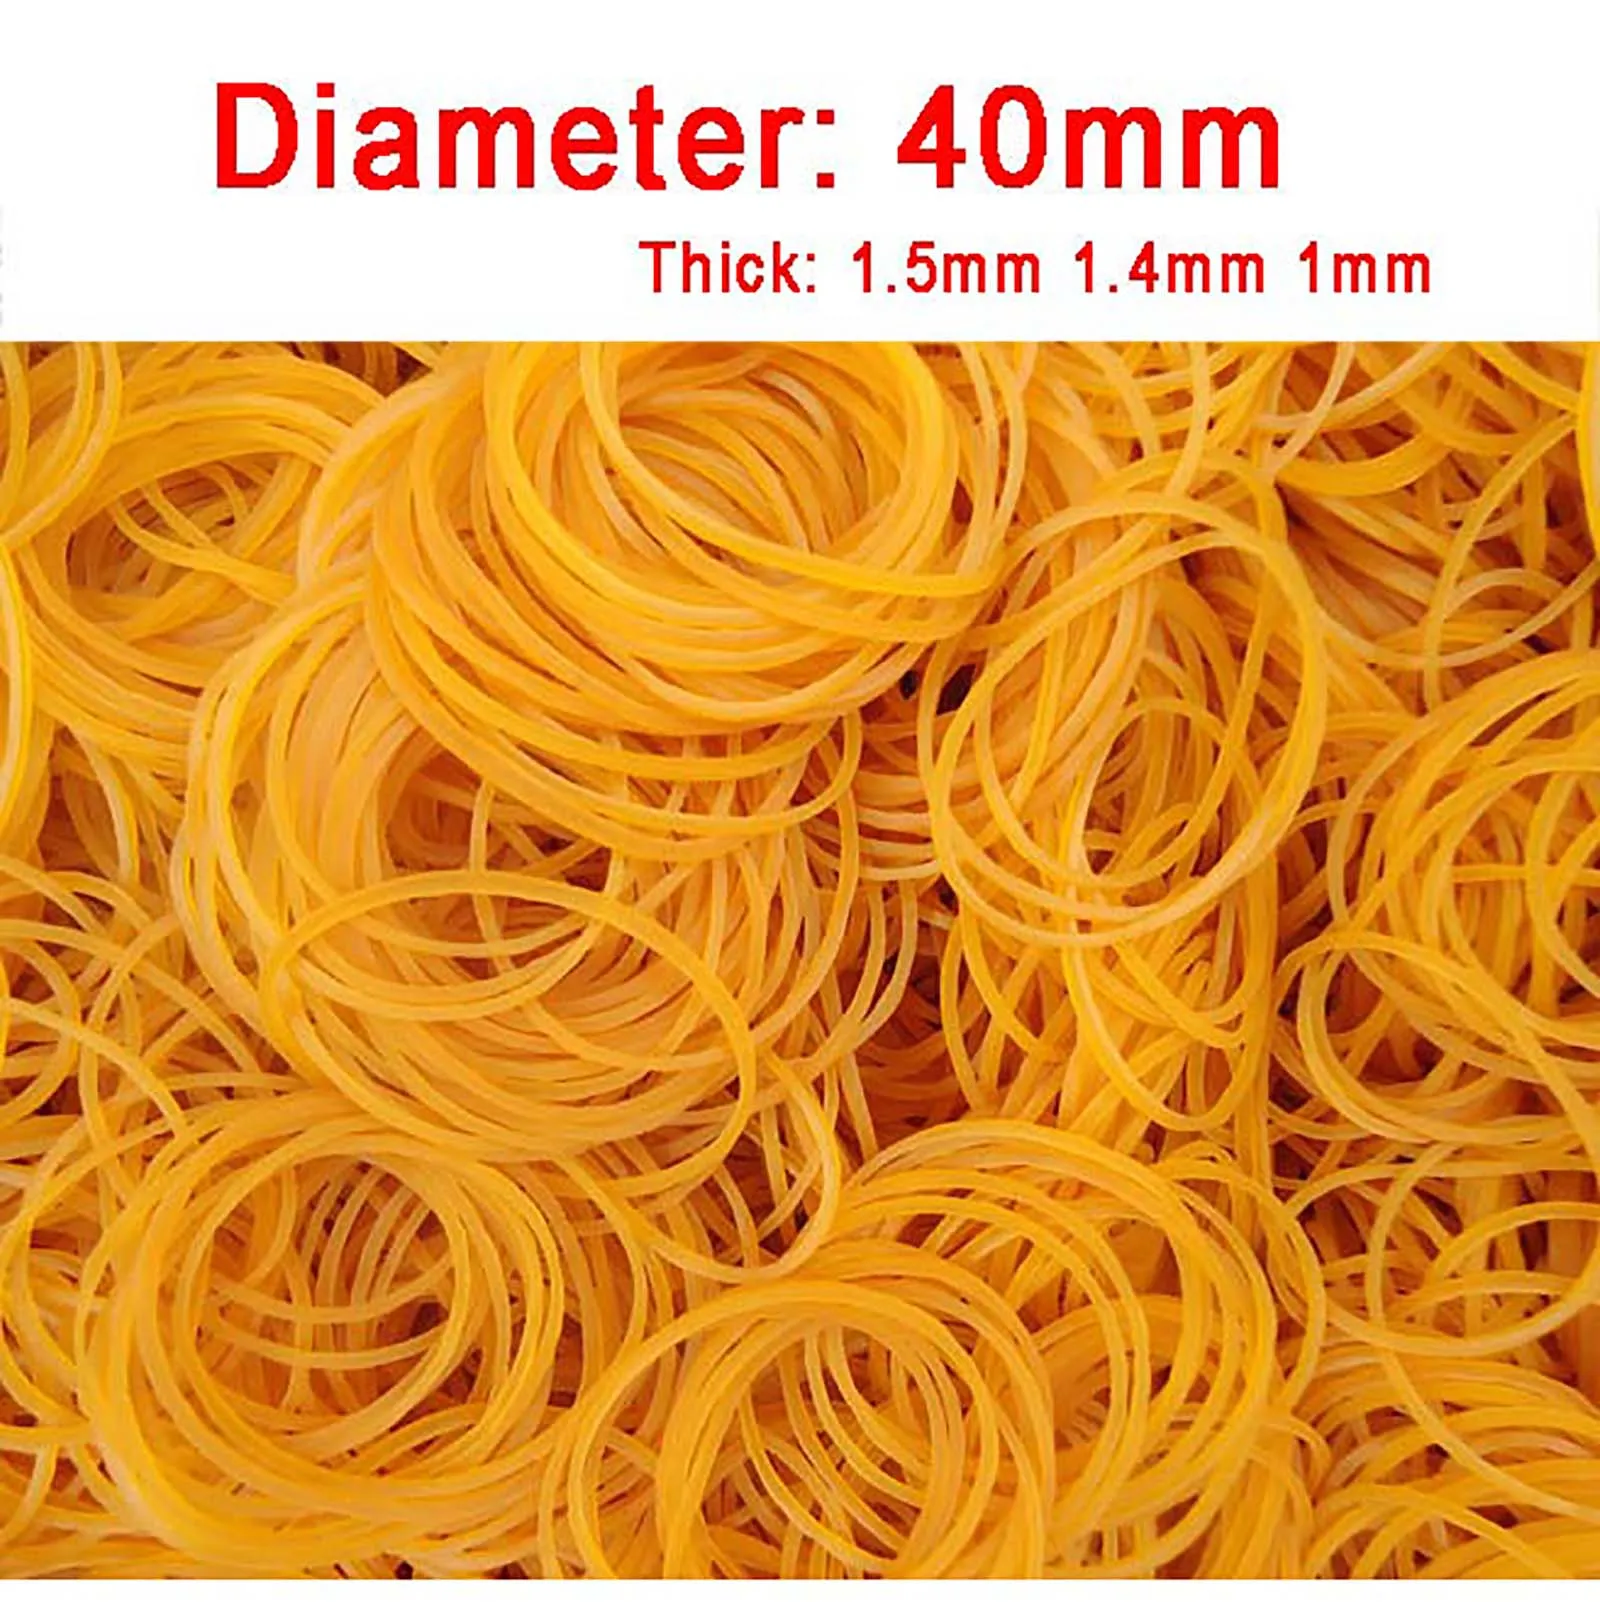 

50g-500g Yellow Quality Elastic Rubber Bands Sturdy Stretchable Packaging Band Loop O Rings Diameter 40mm For Home School Office